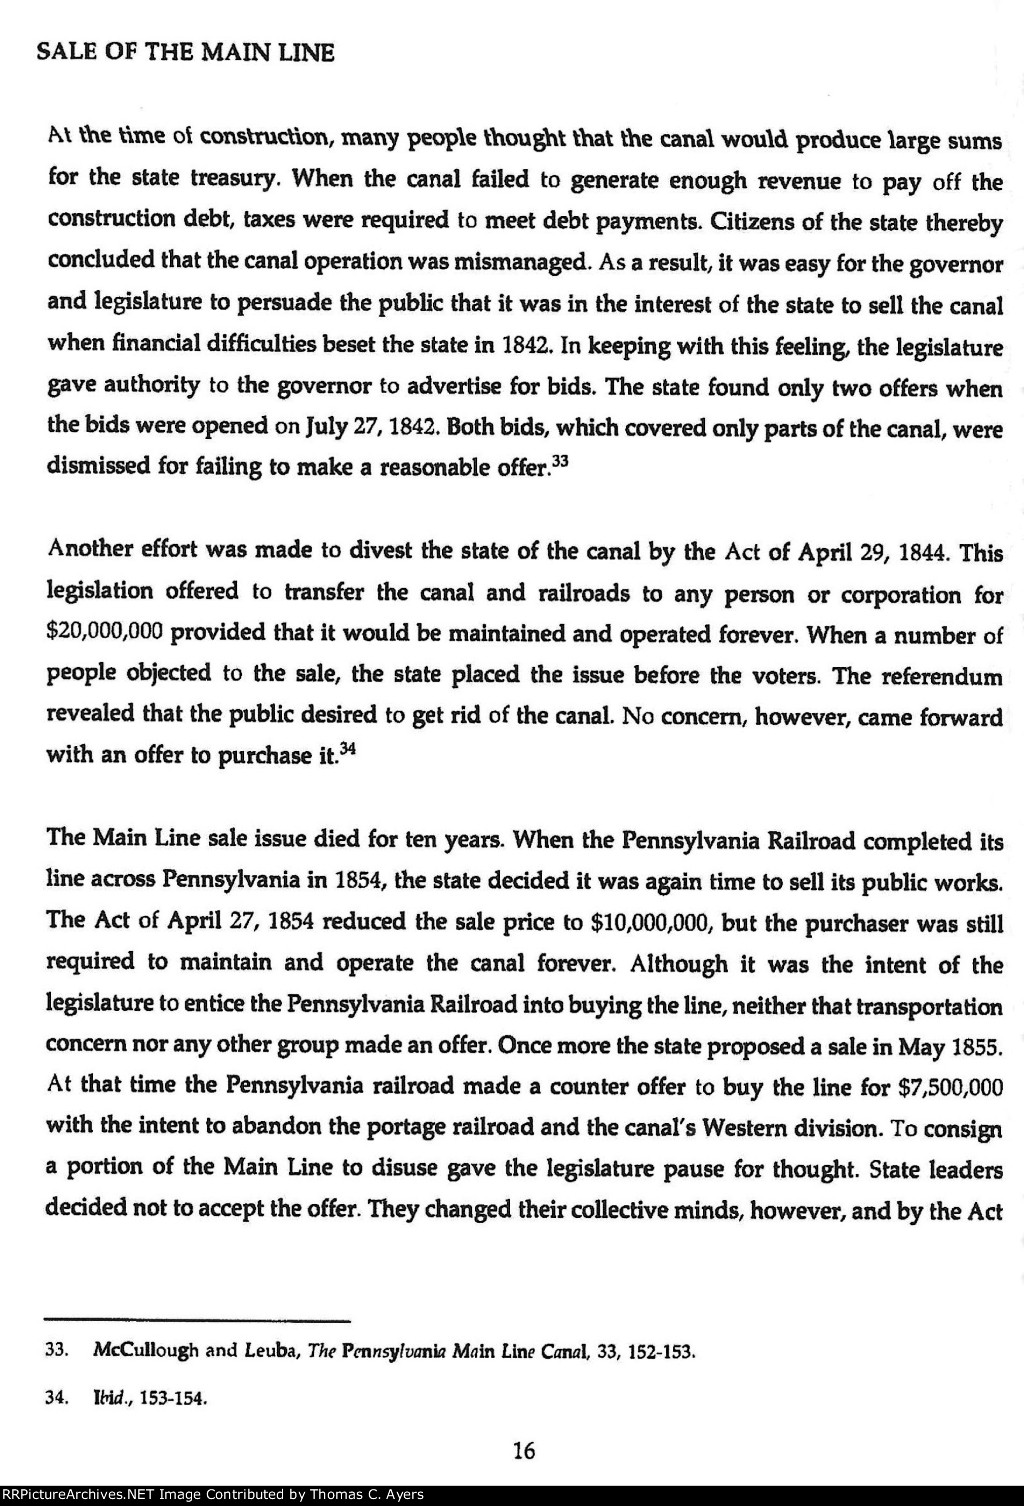 "Pennsylvania Main Line Canal," Page 16, 1993